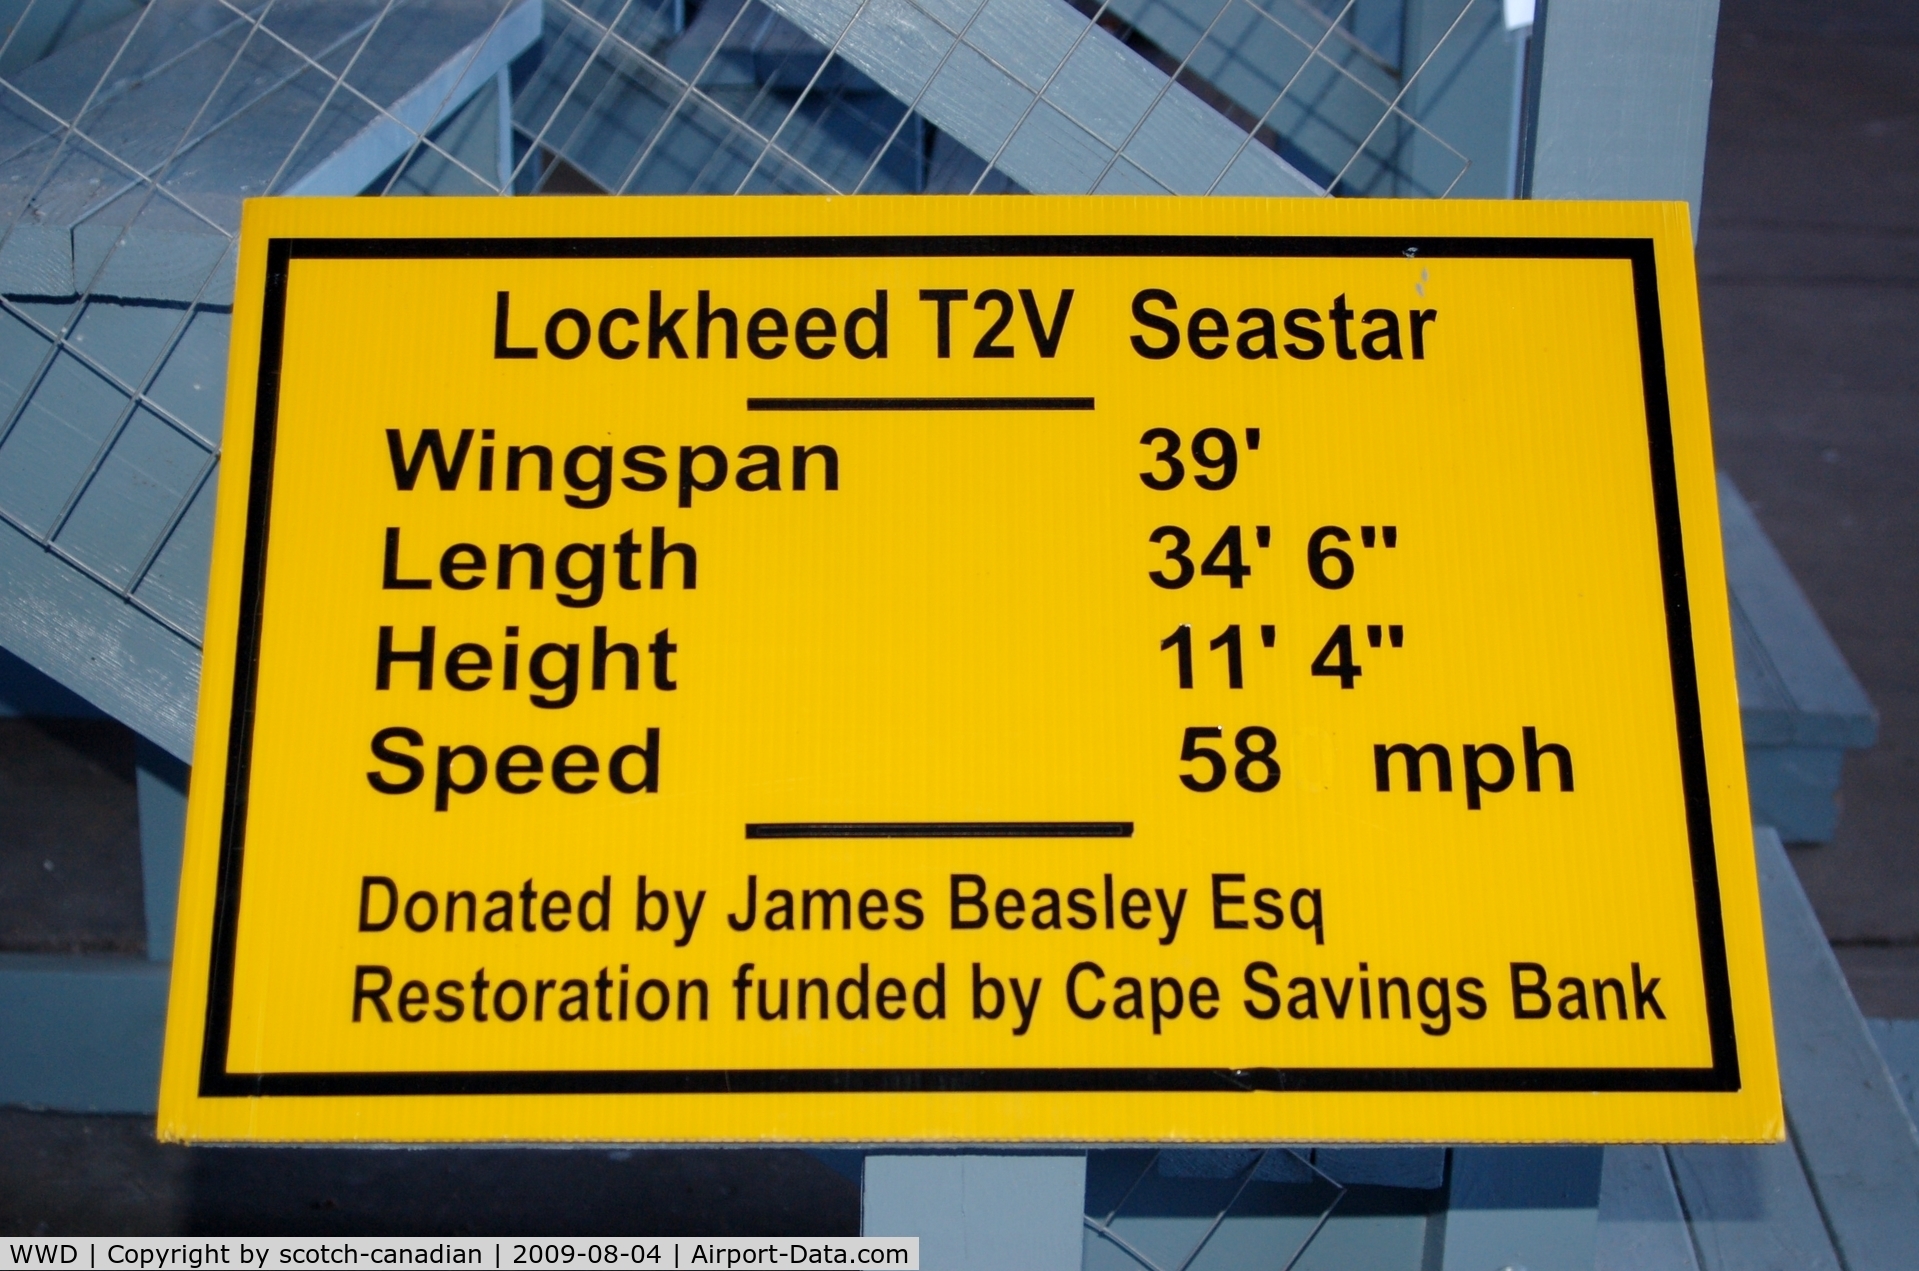 Cape May County Airport (WWD) - Information Sign for the Lockheed T2V Seastar at the Naval Air Station Wildwood Aviation Museum, Cape May County Airport, Wildwood, NJ